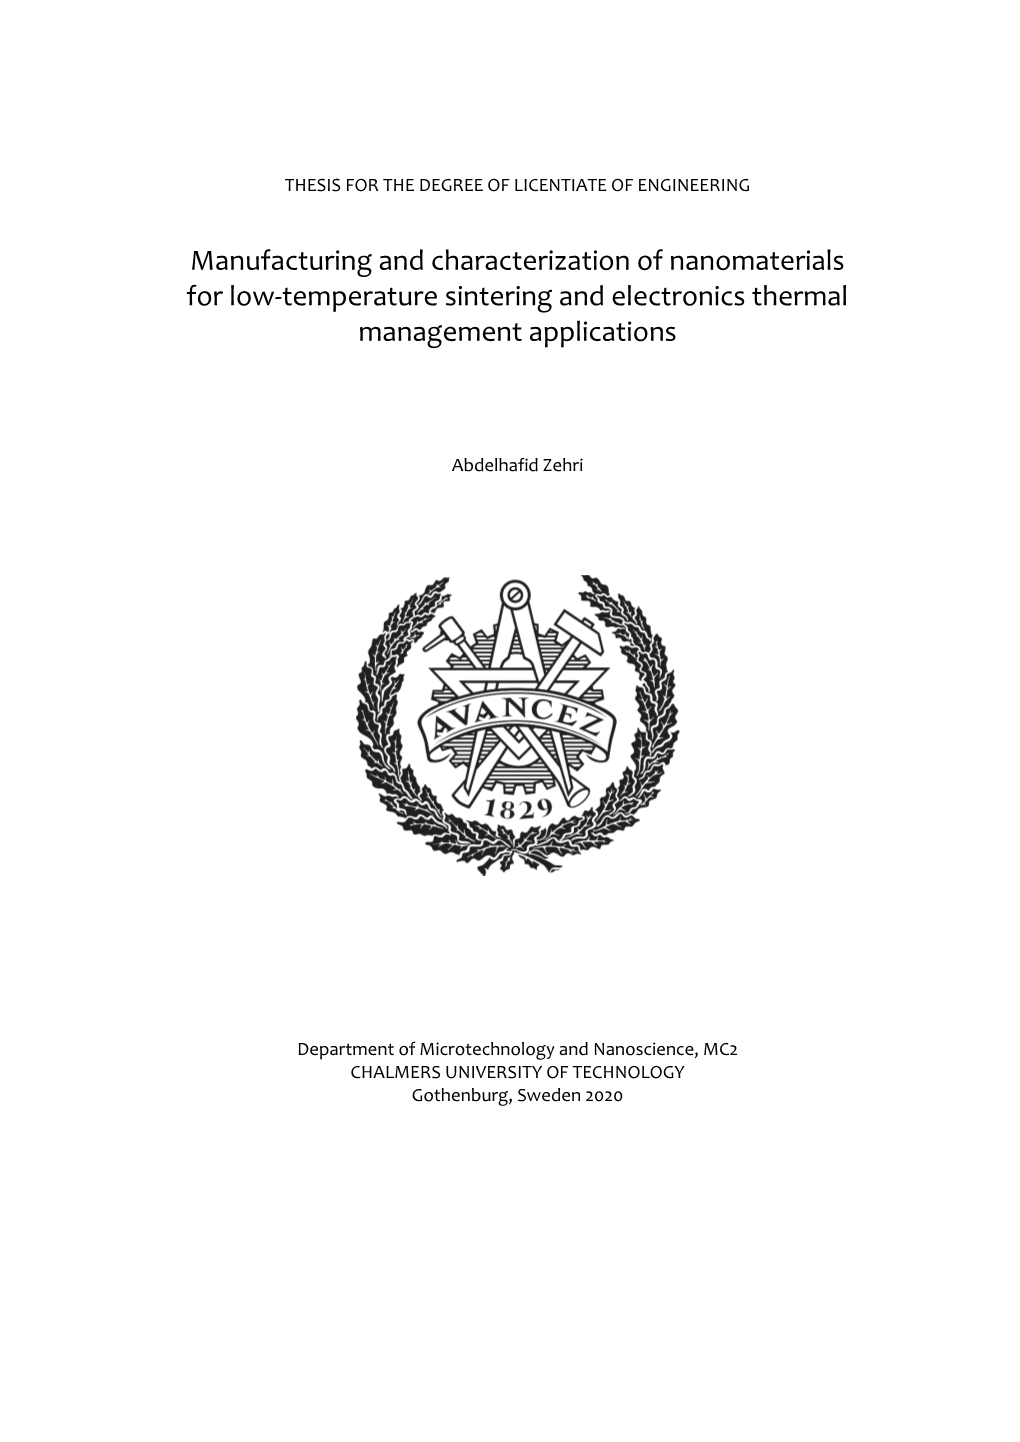 Manufacturing and Characterization of Nanomaterials for Low-Temperature Sintering and Electronics Thermal Management Applications